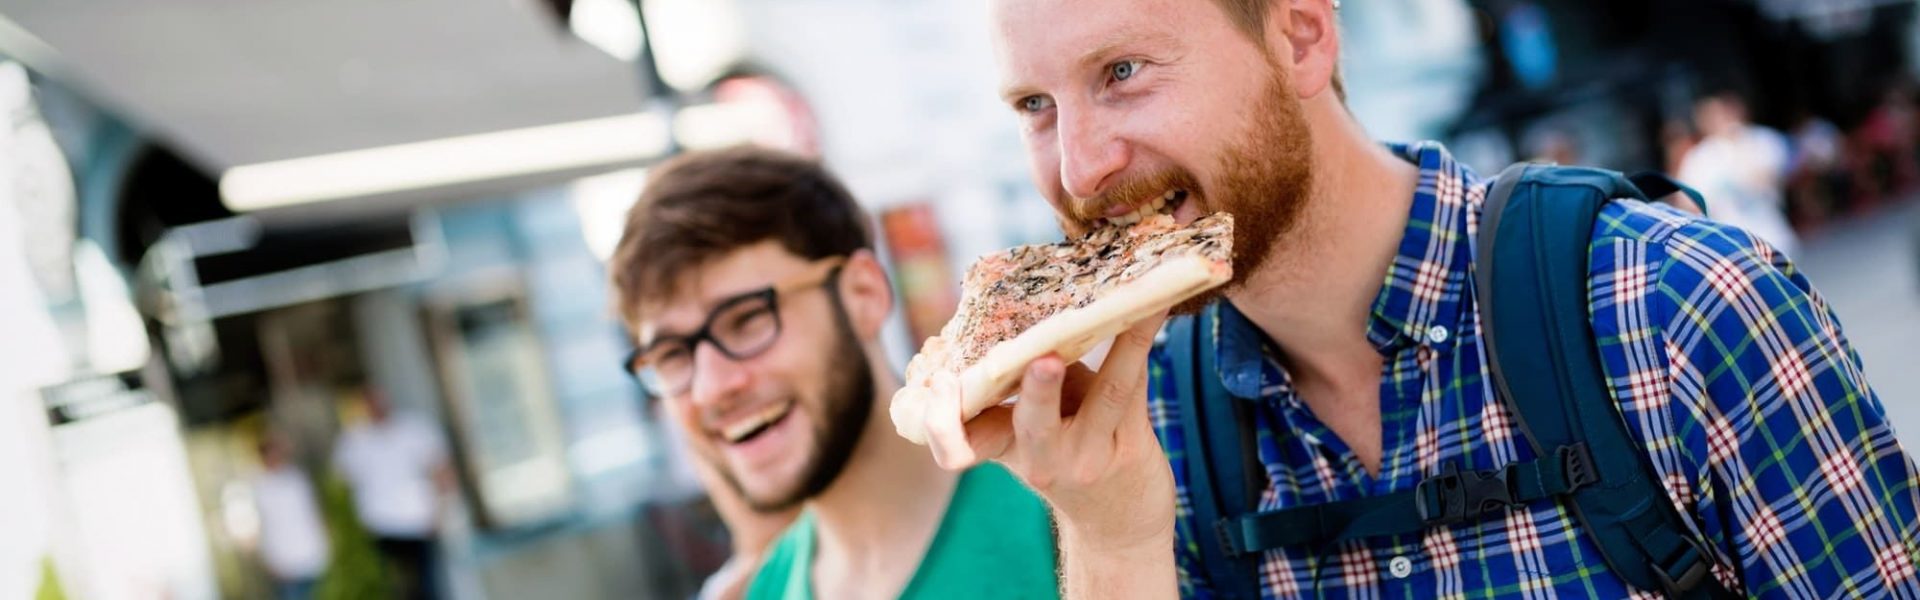 Happy students eating pizza on street